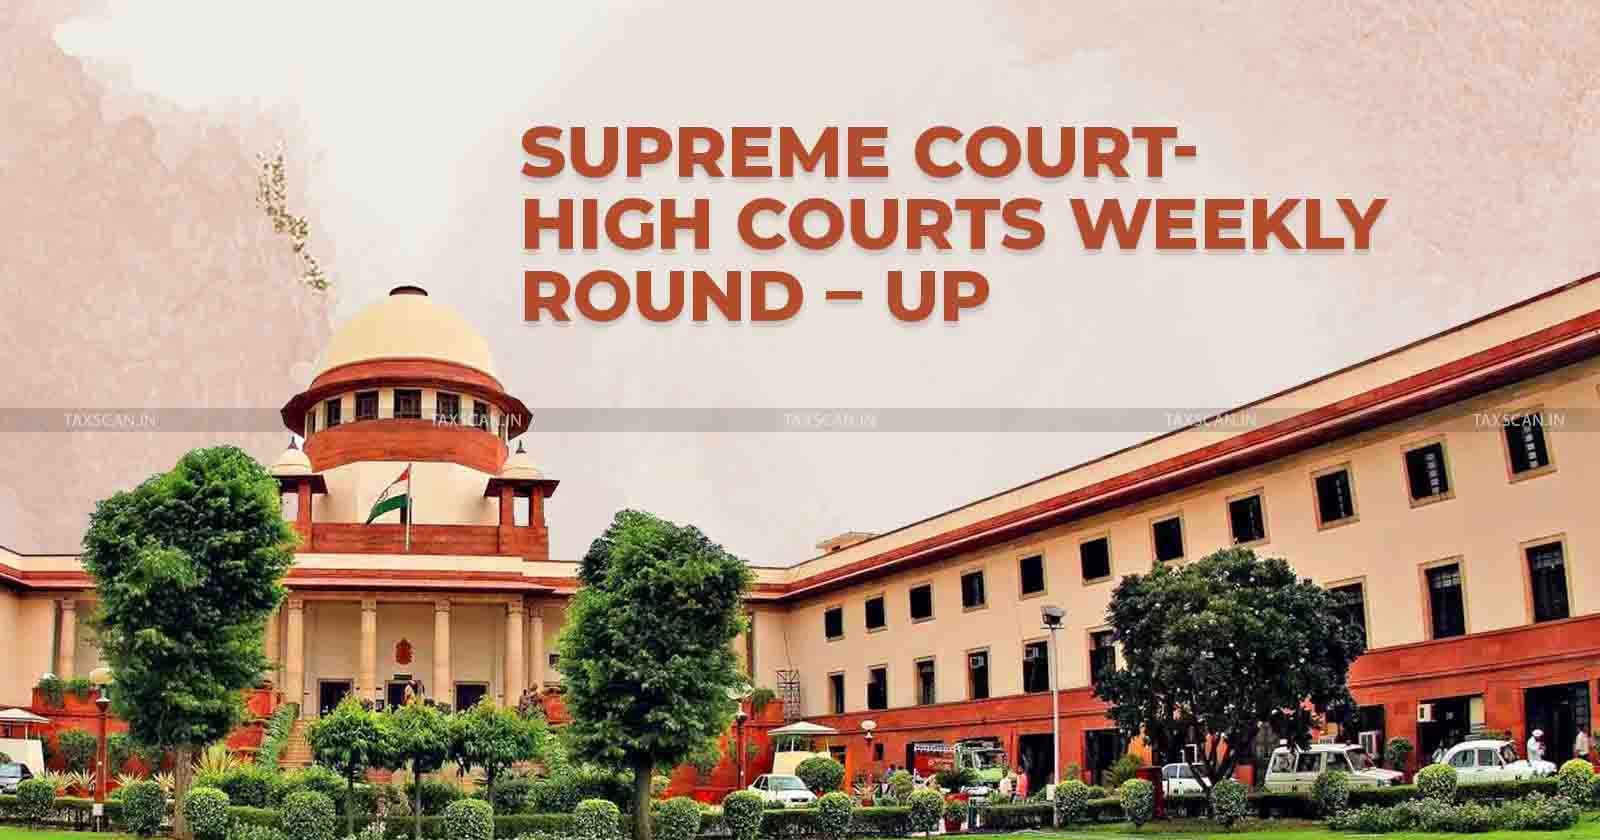 Supreme Court and High Courts Weekly Roundup - Supreme Court - High Courts - Weekly Roundup - taxscan